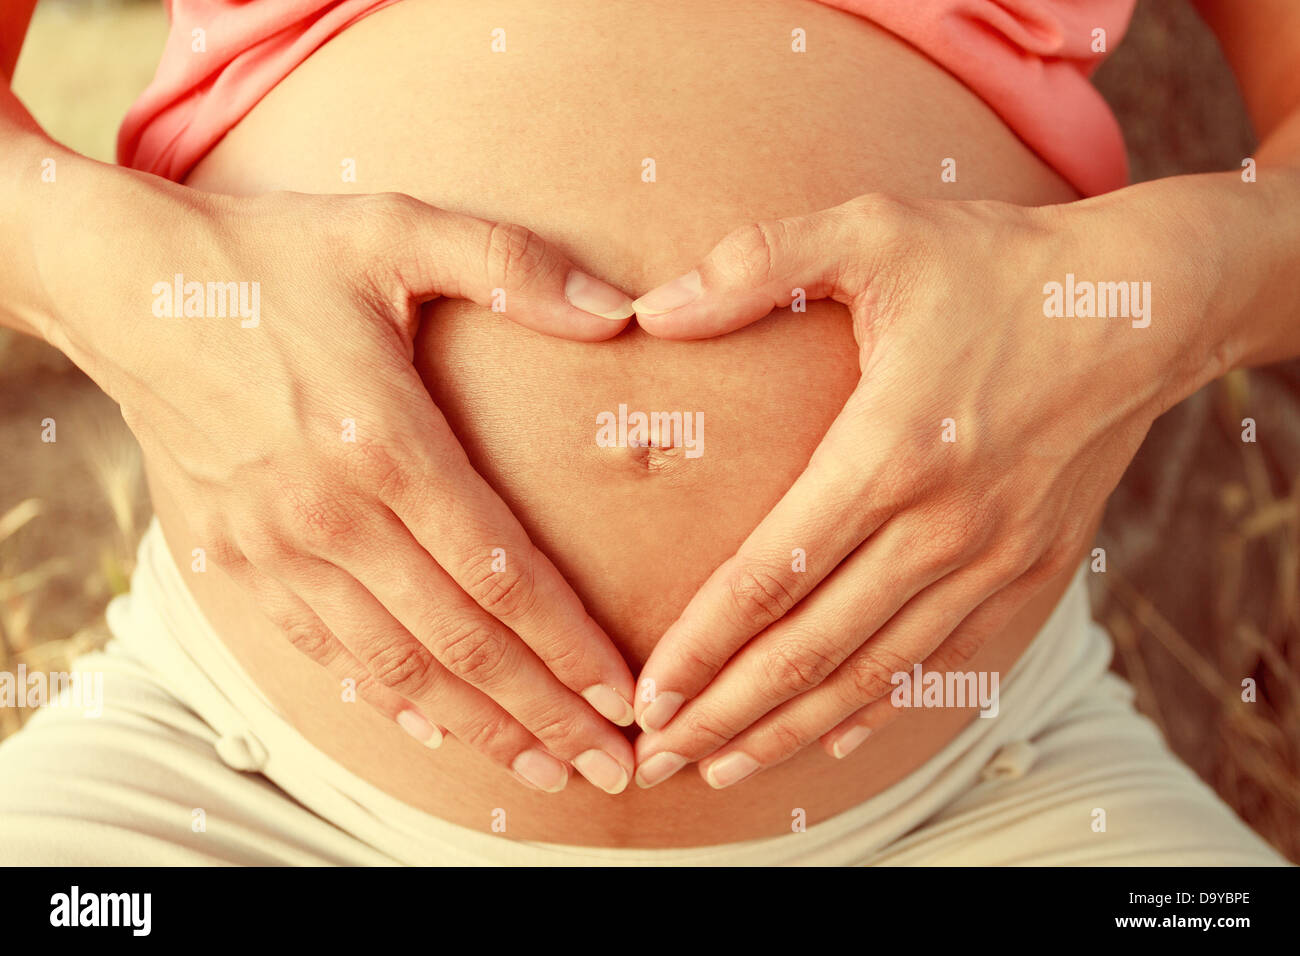 Pregnant woman making heart shape with her hands Stock Photo